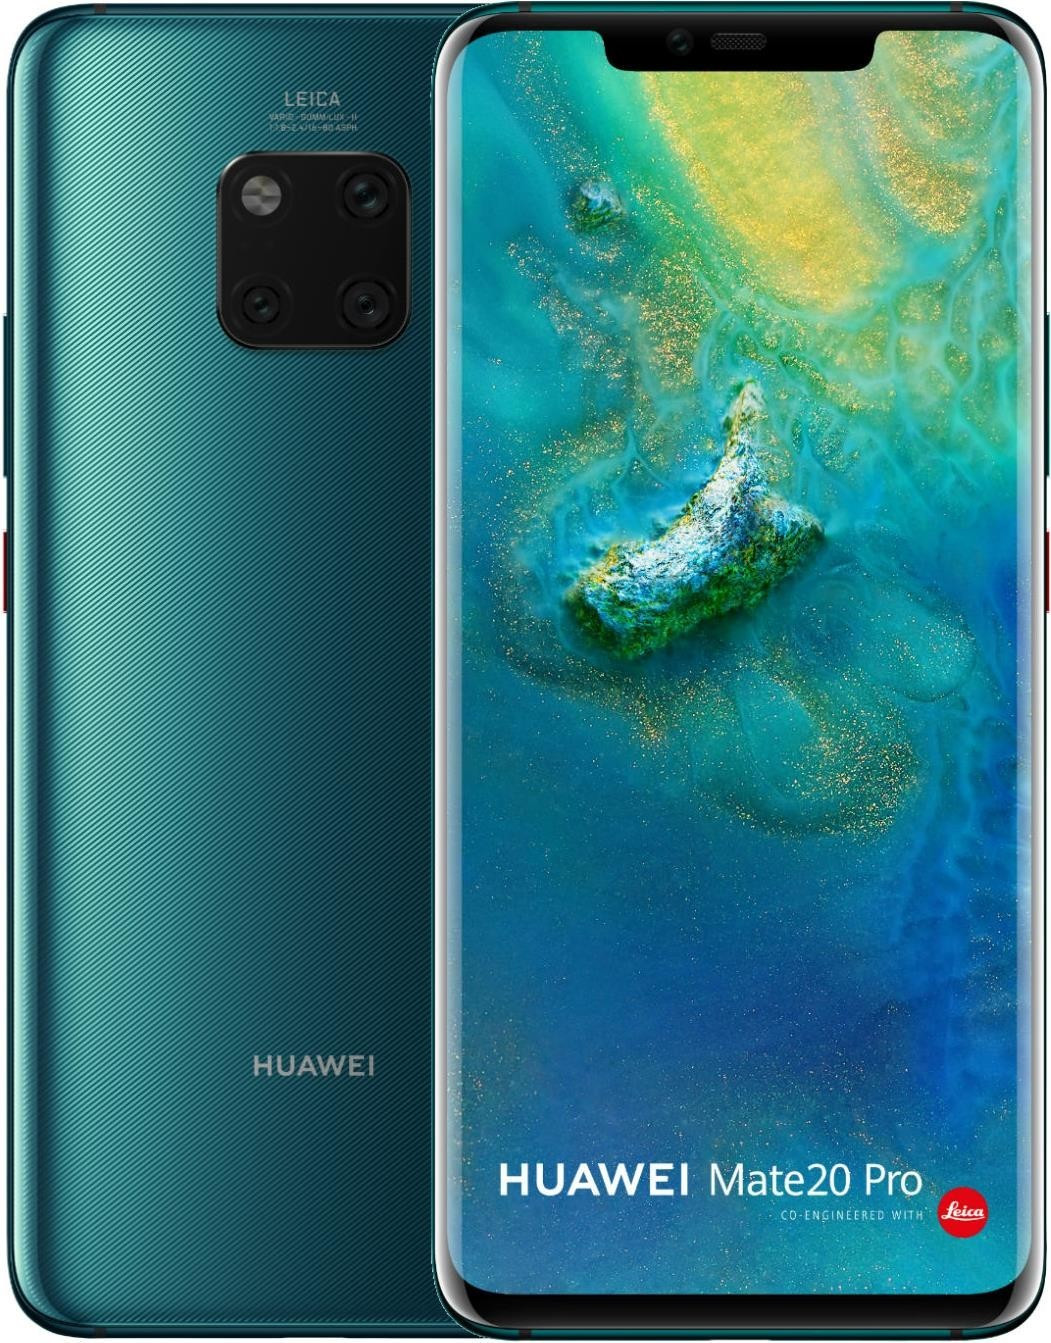 Huawei Mate 20 Pro Price, Video Review, Specs and Features